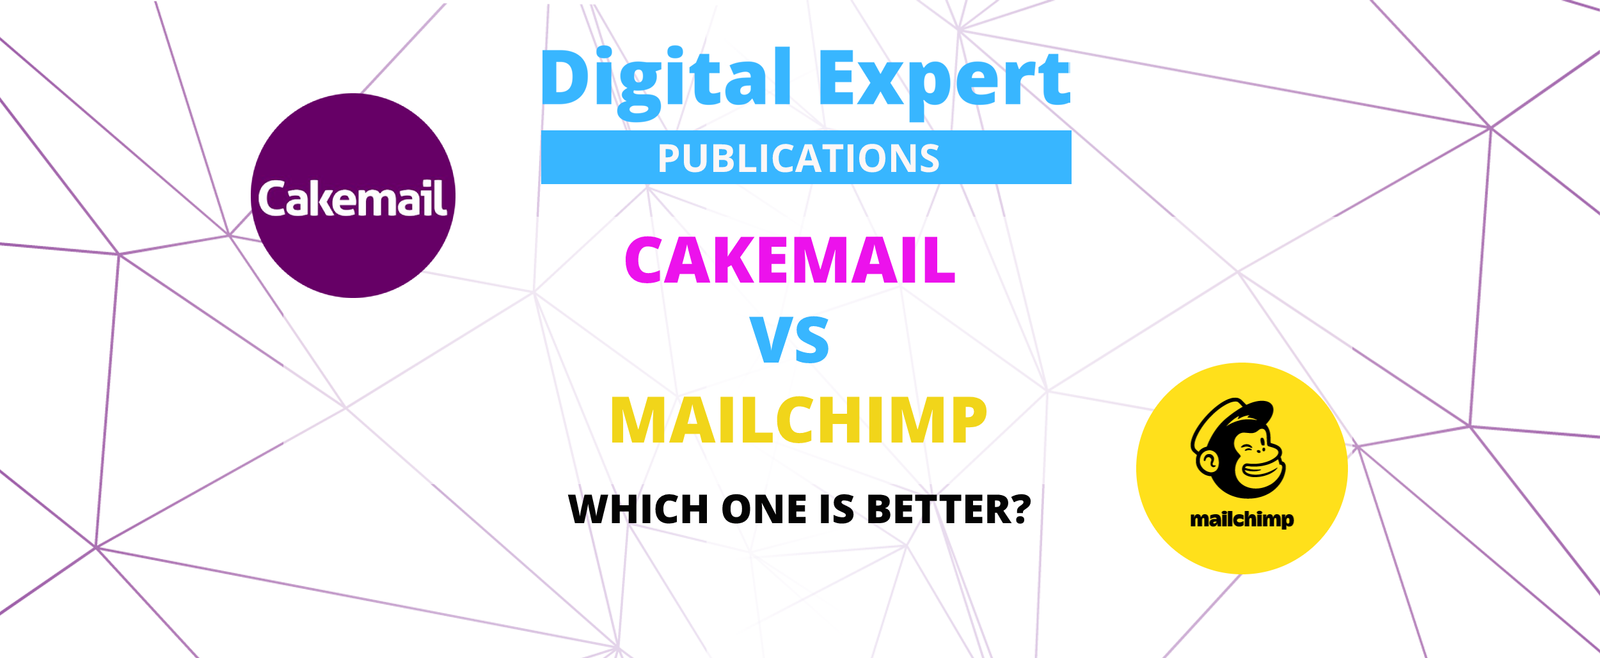 Cakemail vs Mailchimp. Which One is Better? Service comparison - Digital Expert